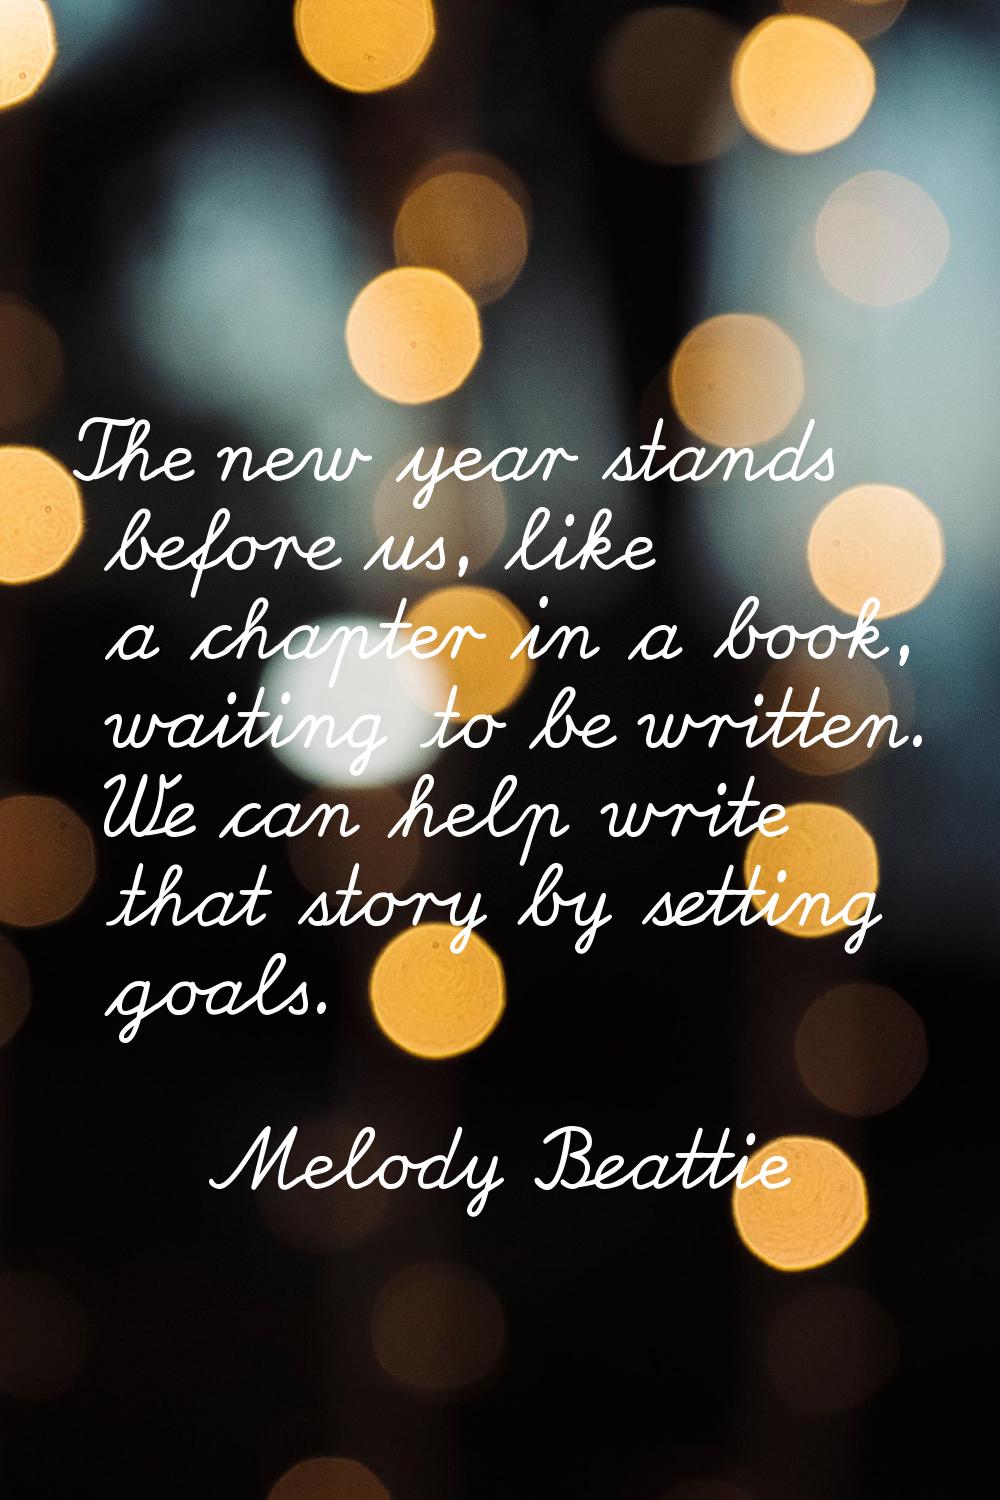 The new year stands before us, like a chapter in a book, waiting to be written. We can help write t